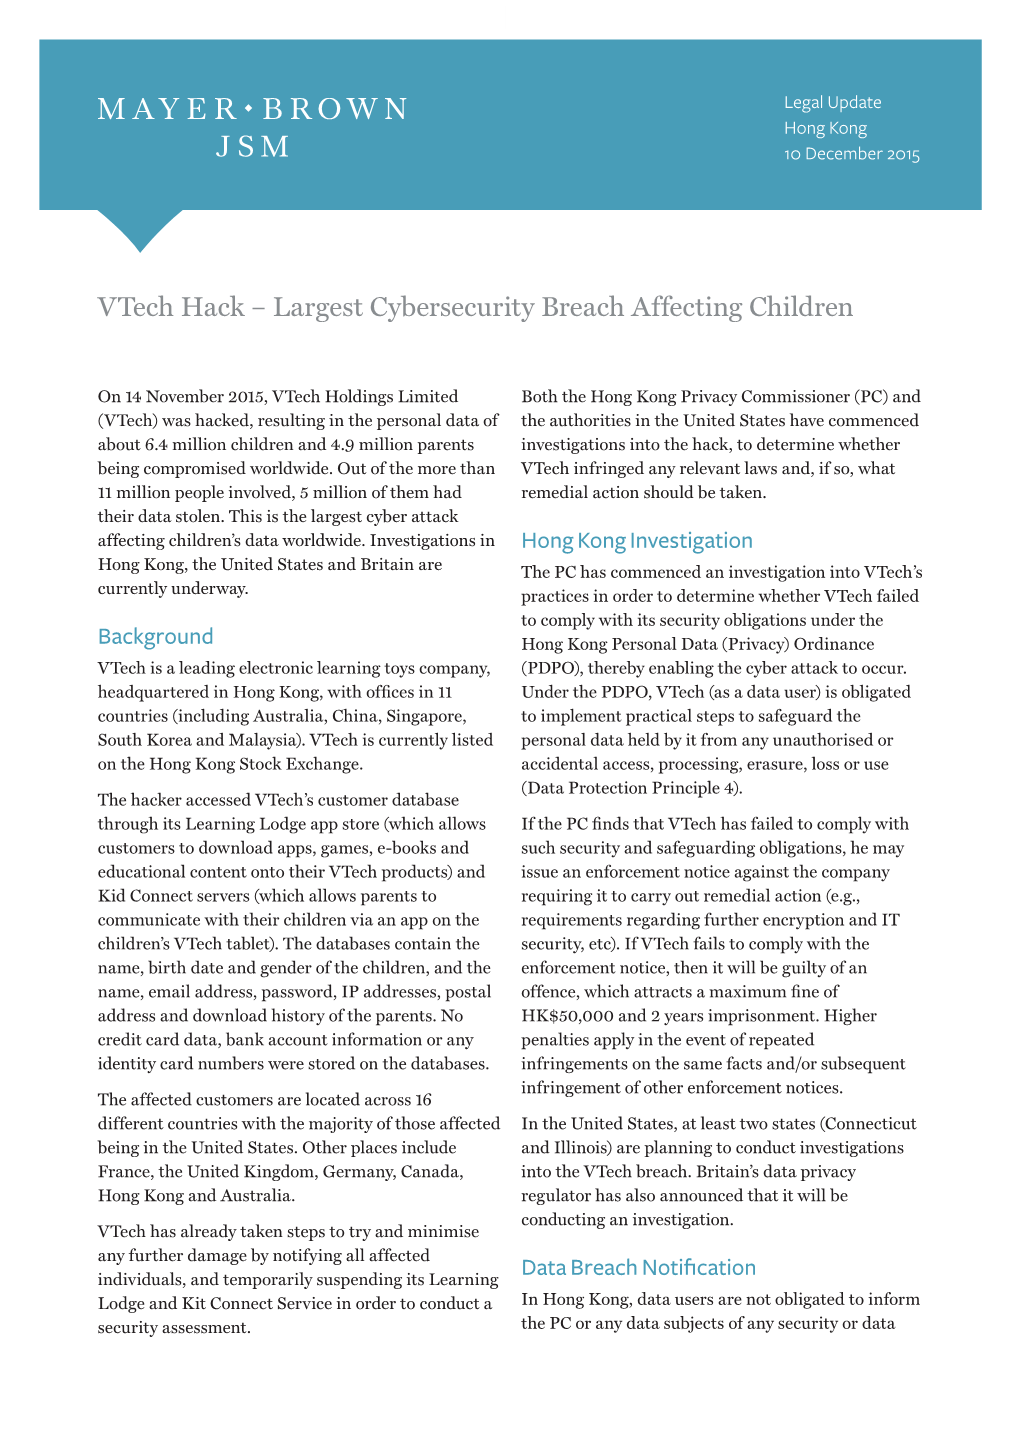 Vtech Hack – Largest Cybersecurity Breach Affecting Children